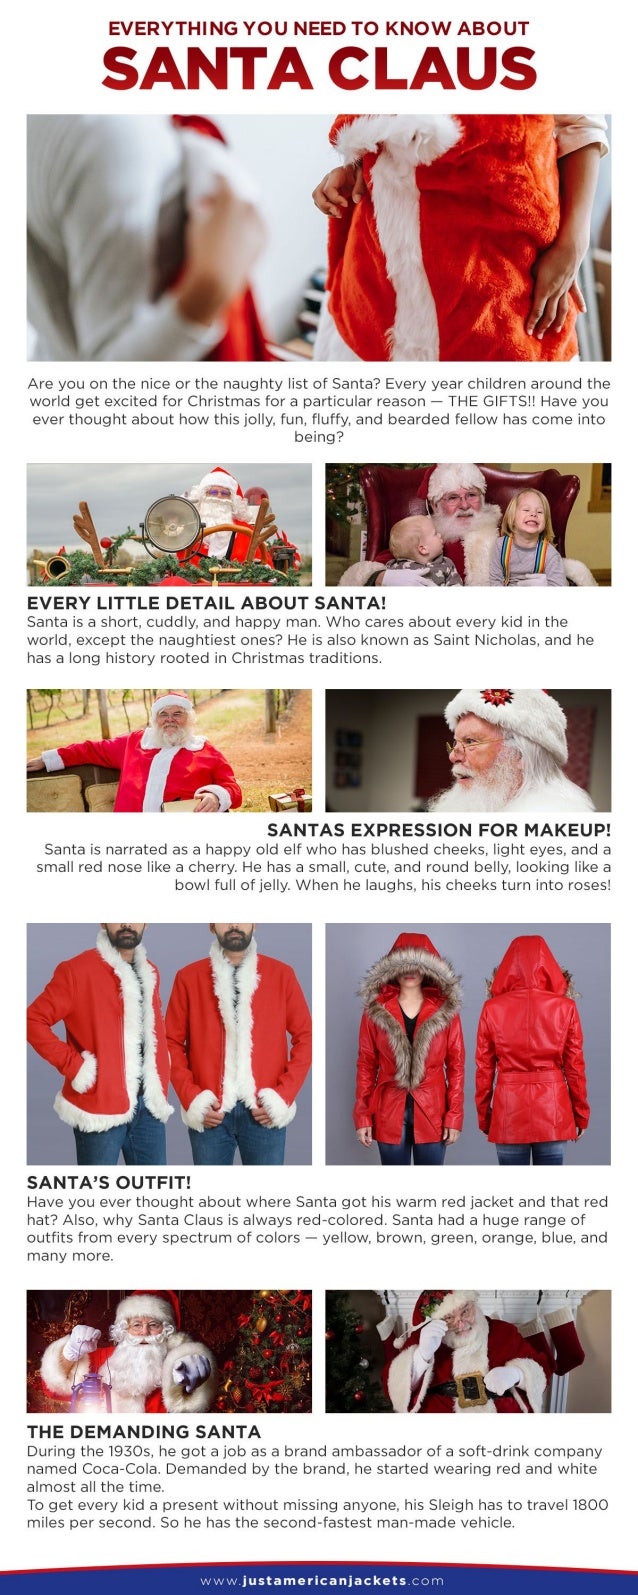 Everything You Need To Know About Santa Claus